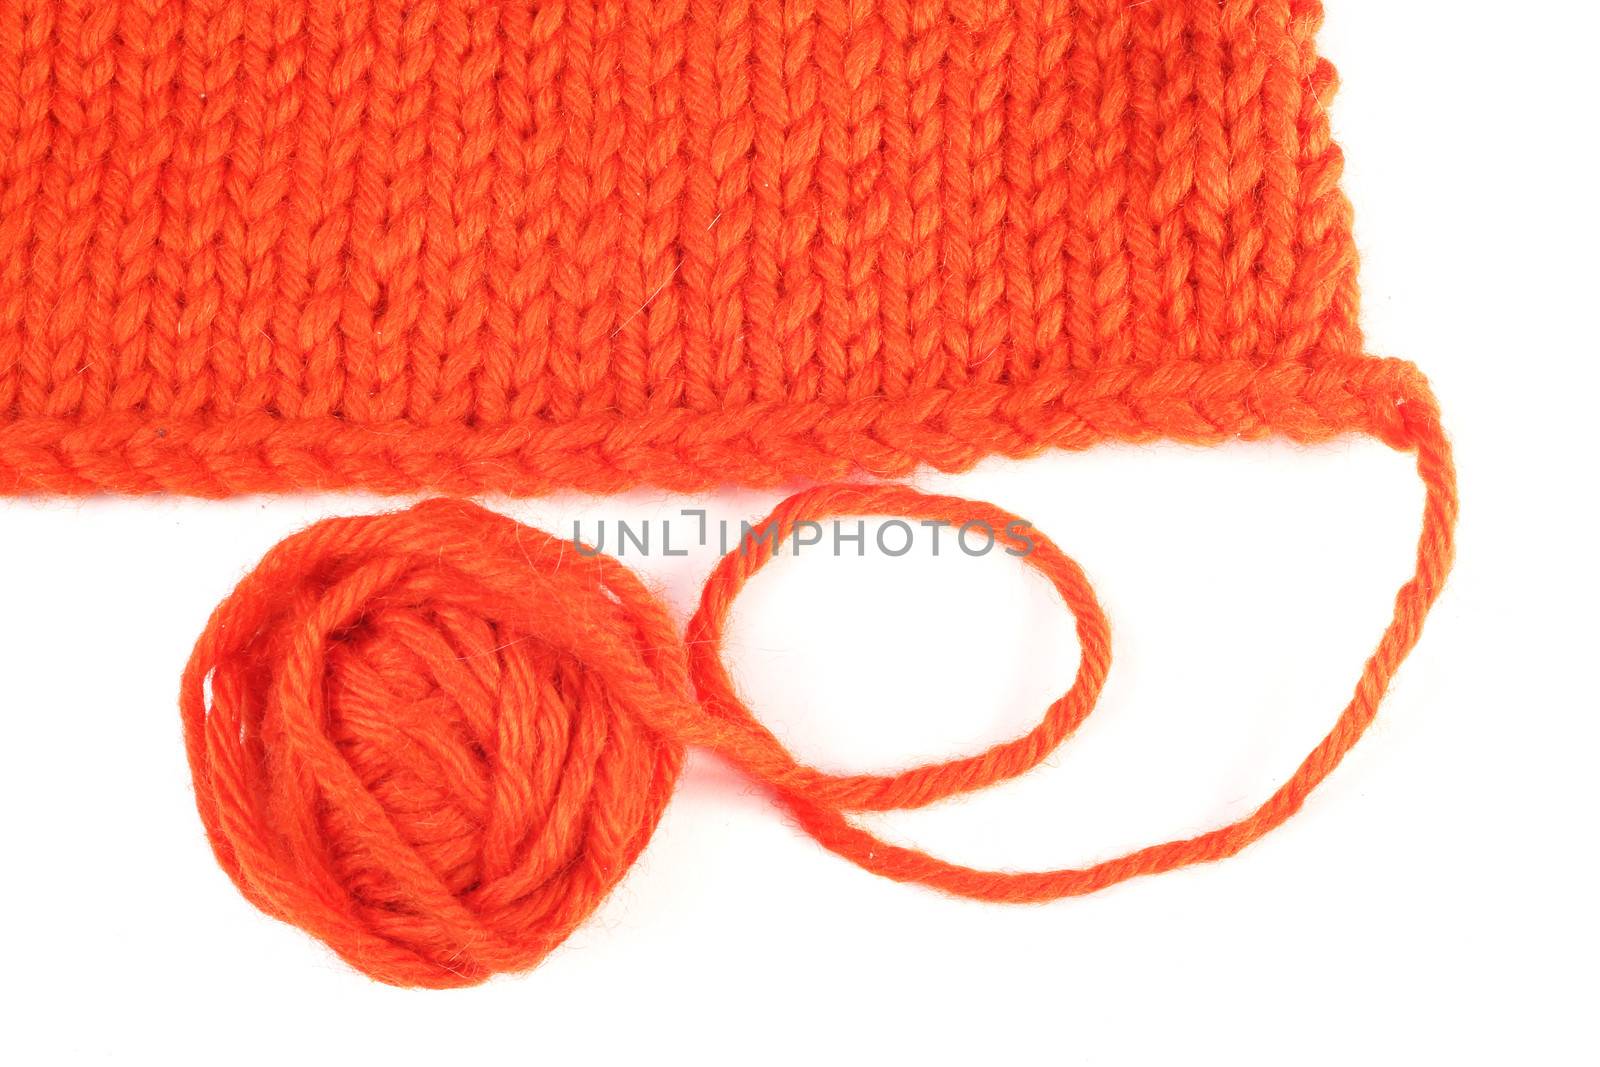 Wool yarn and knitted textile isolated on white background